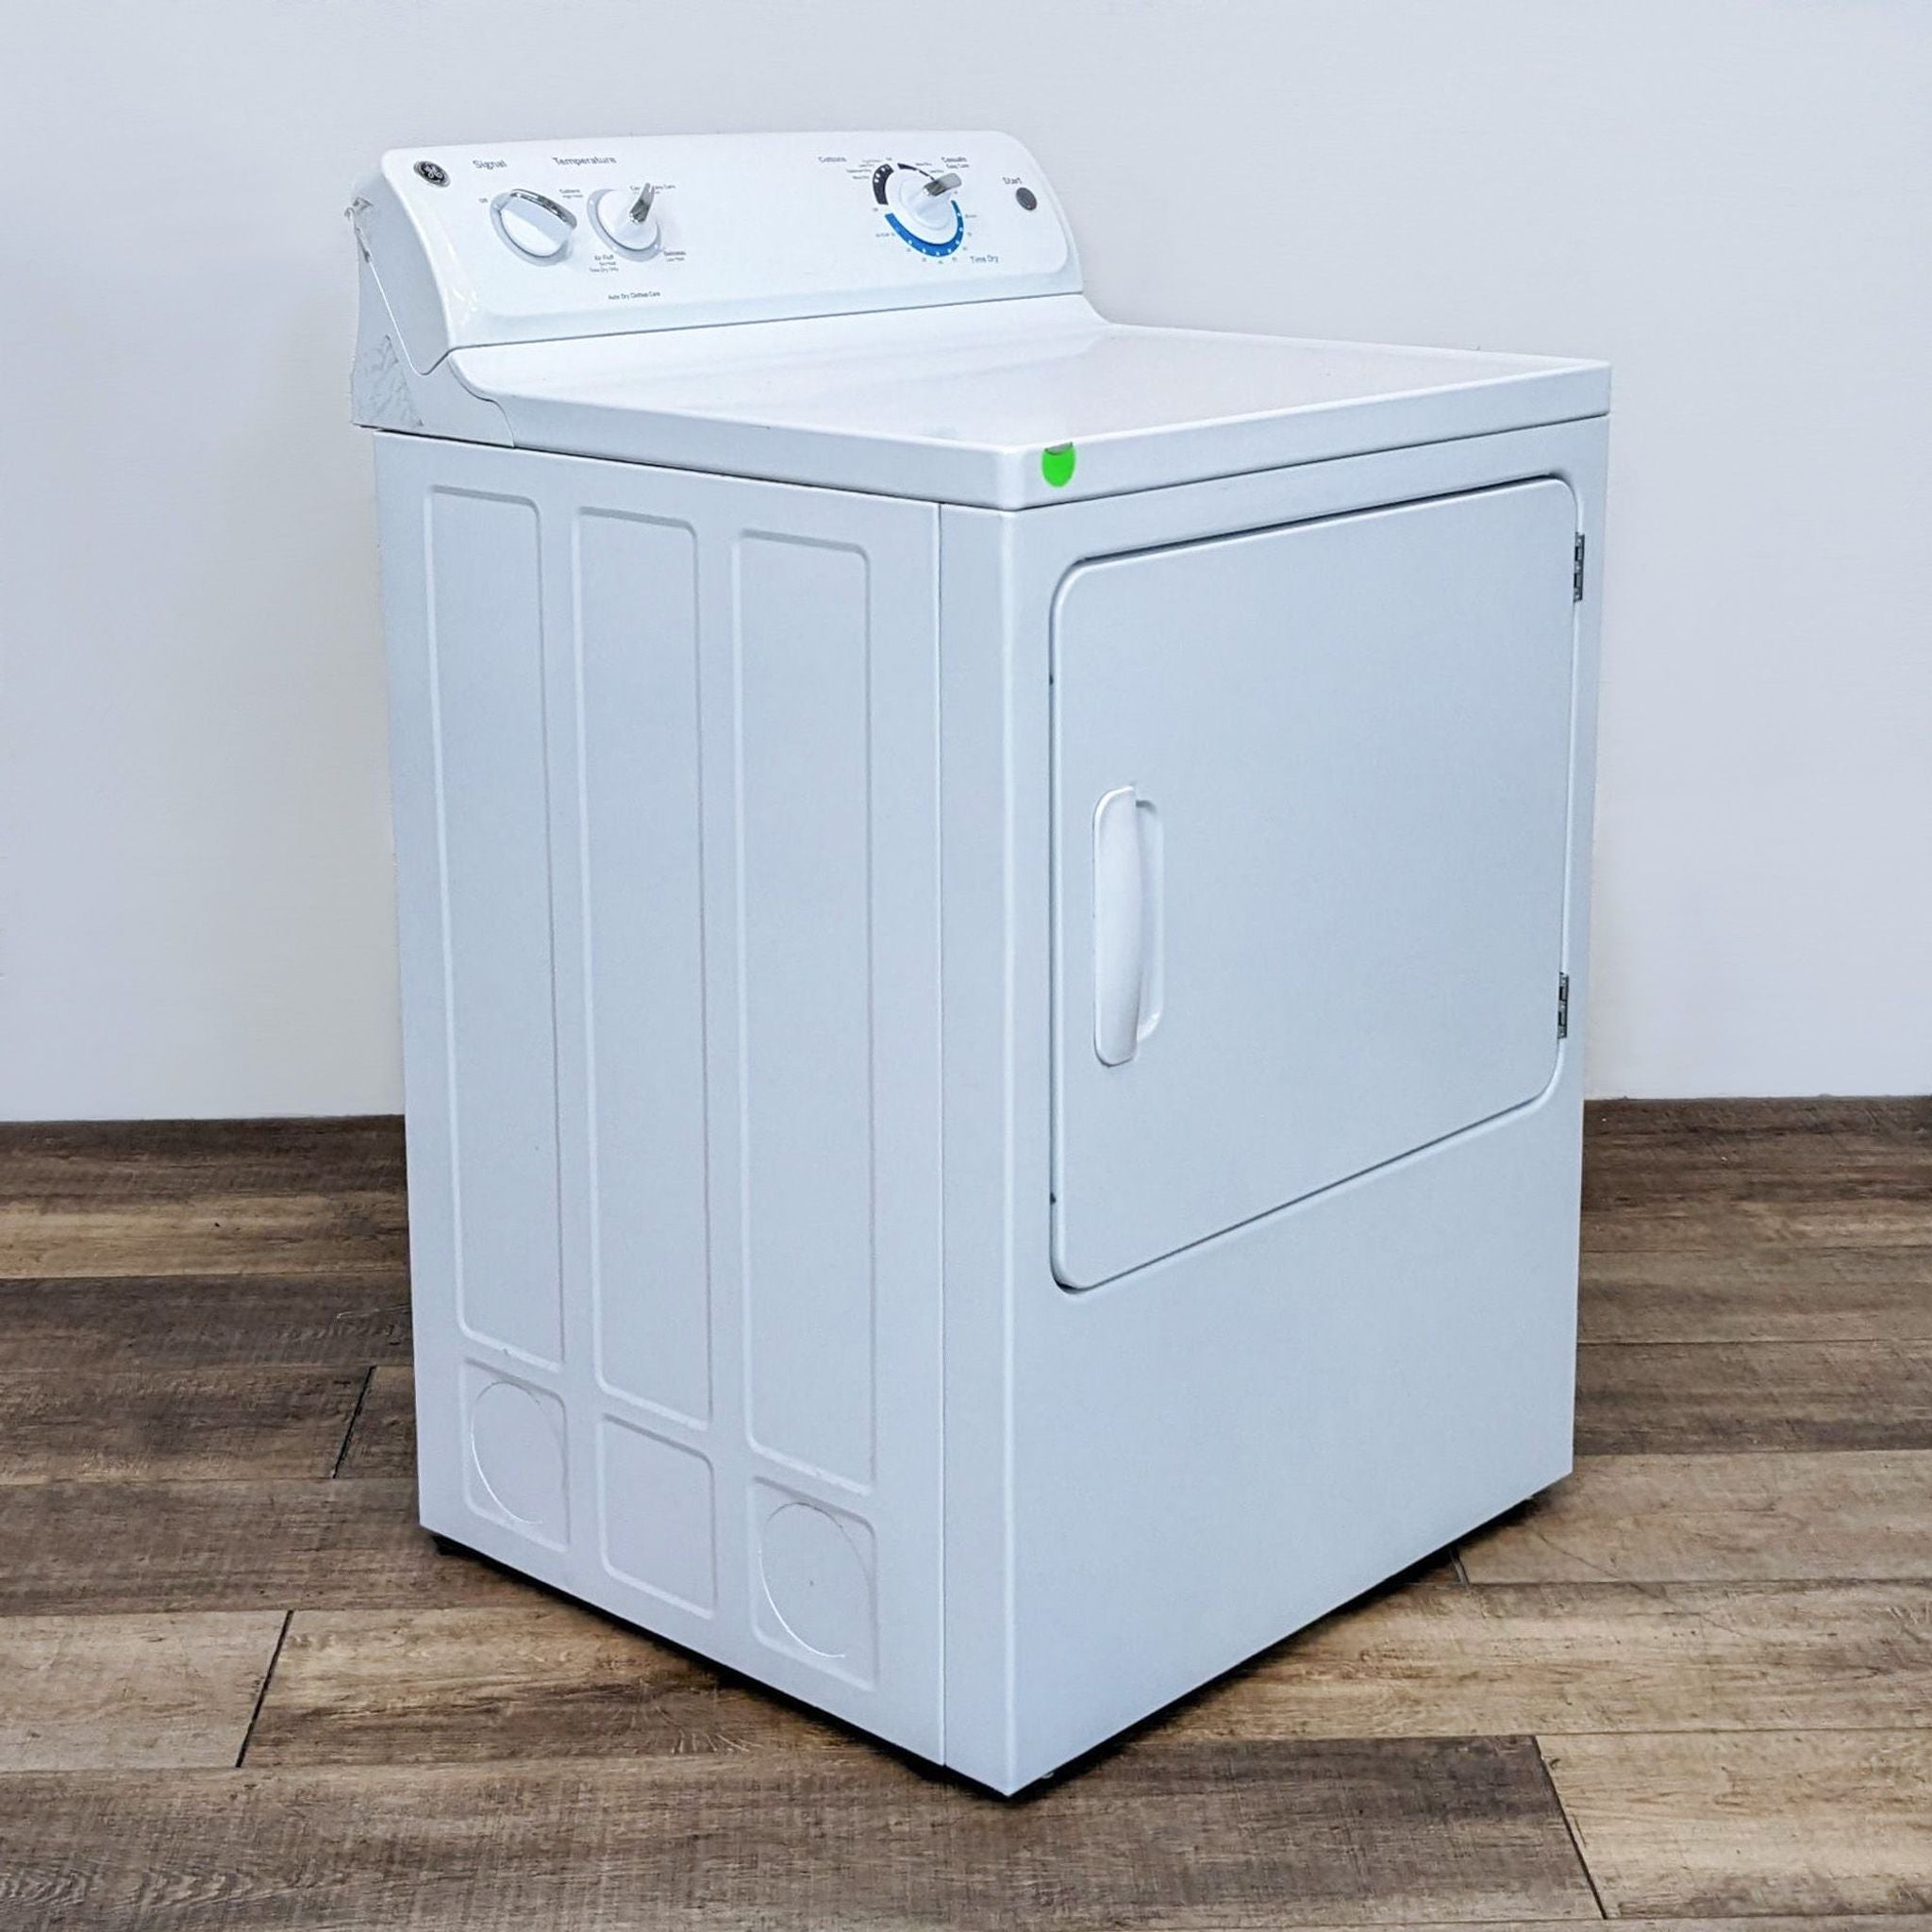 Side perspective of a GE washer/dryer with ribbed side panels on a wood floor.